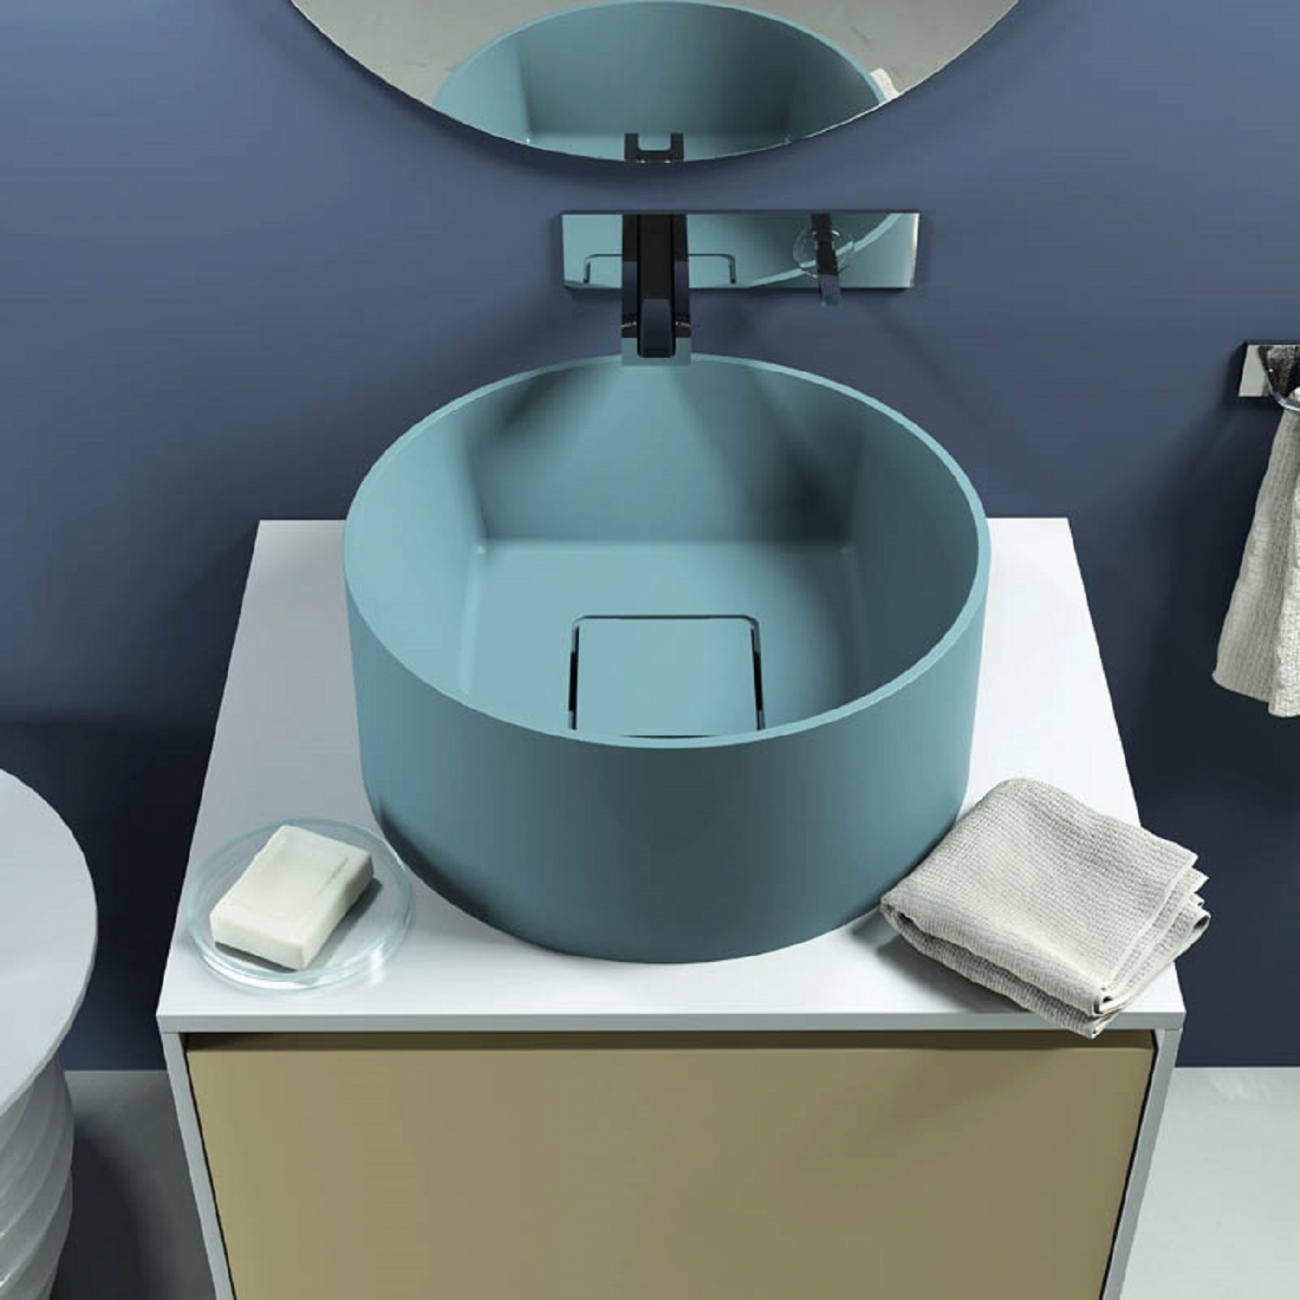 RELAX DESIGN INSIDE OUT C SQUARE LUXOLID WASHBASIN